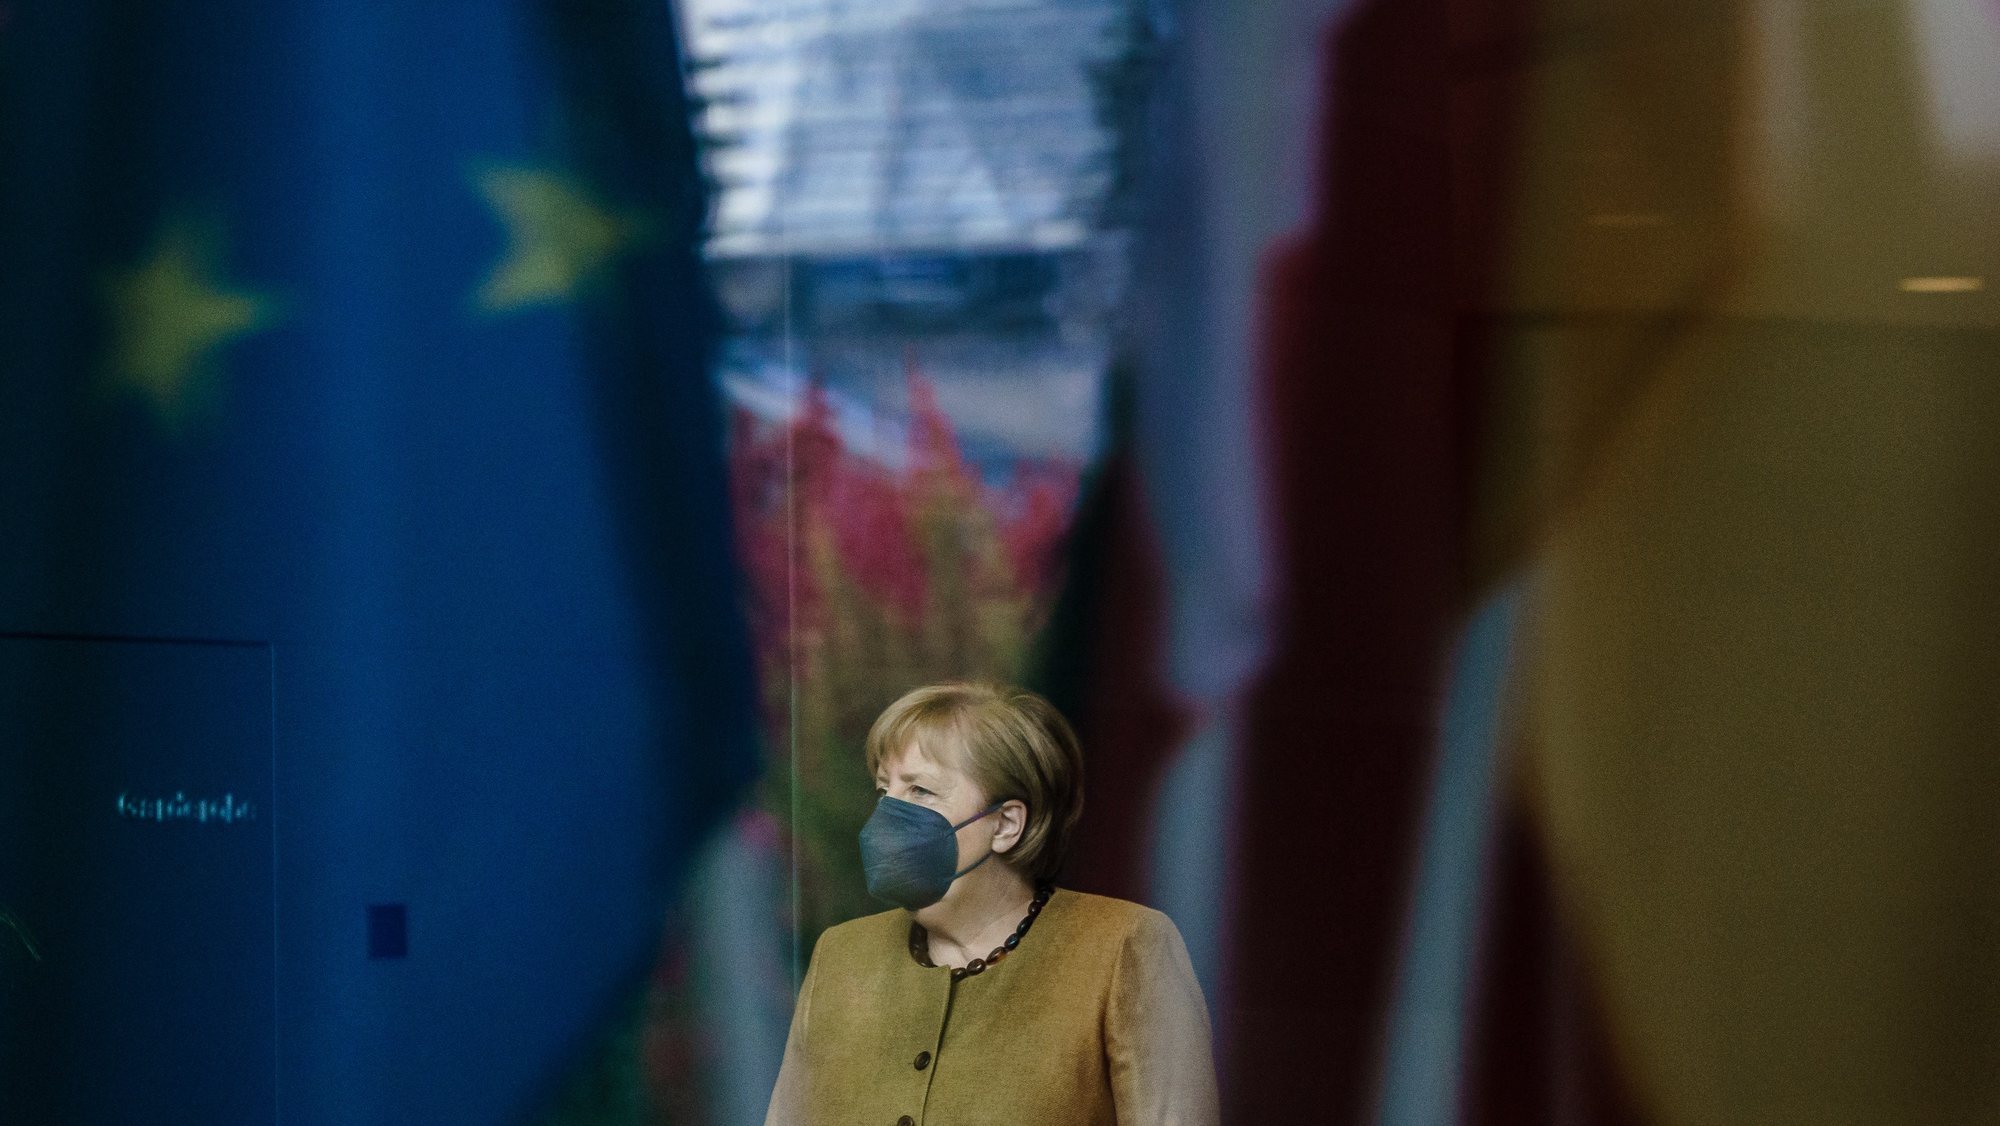 epa09519736 German Chancellor Angela Merkel, seen behind reflections of flags and the dome of the German Parliament &#039;Bundestag&#039;, waits for the arrival of Italian President Sergio Mattarella at the chancellery in Berlin, Germany, 12 October 2021. Merkel and Mattarella meet for bilateral talks. The Italian president is on an official visit to Berlin.  EPA/CLEMENS BILAN